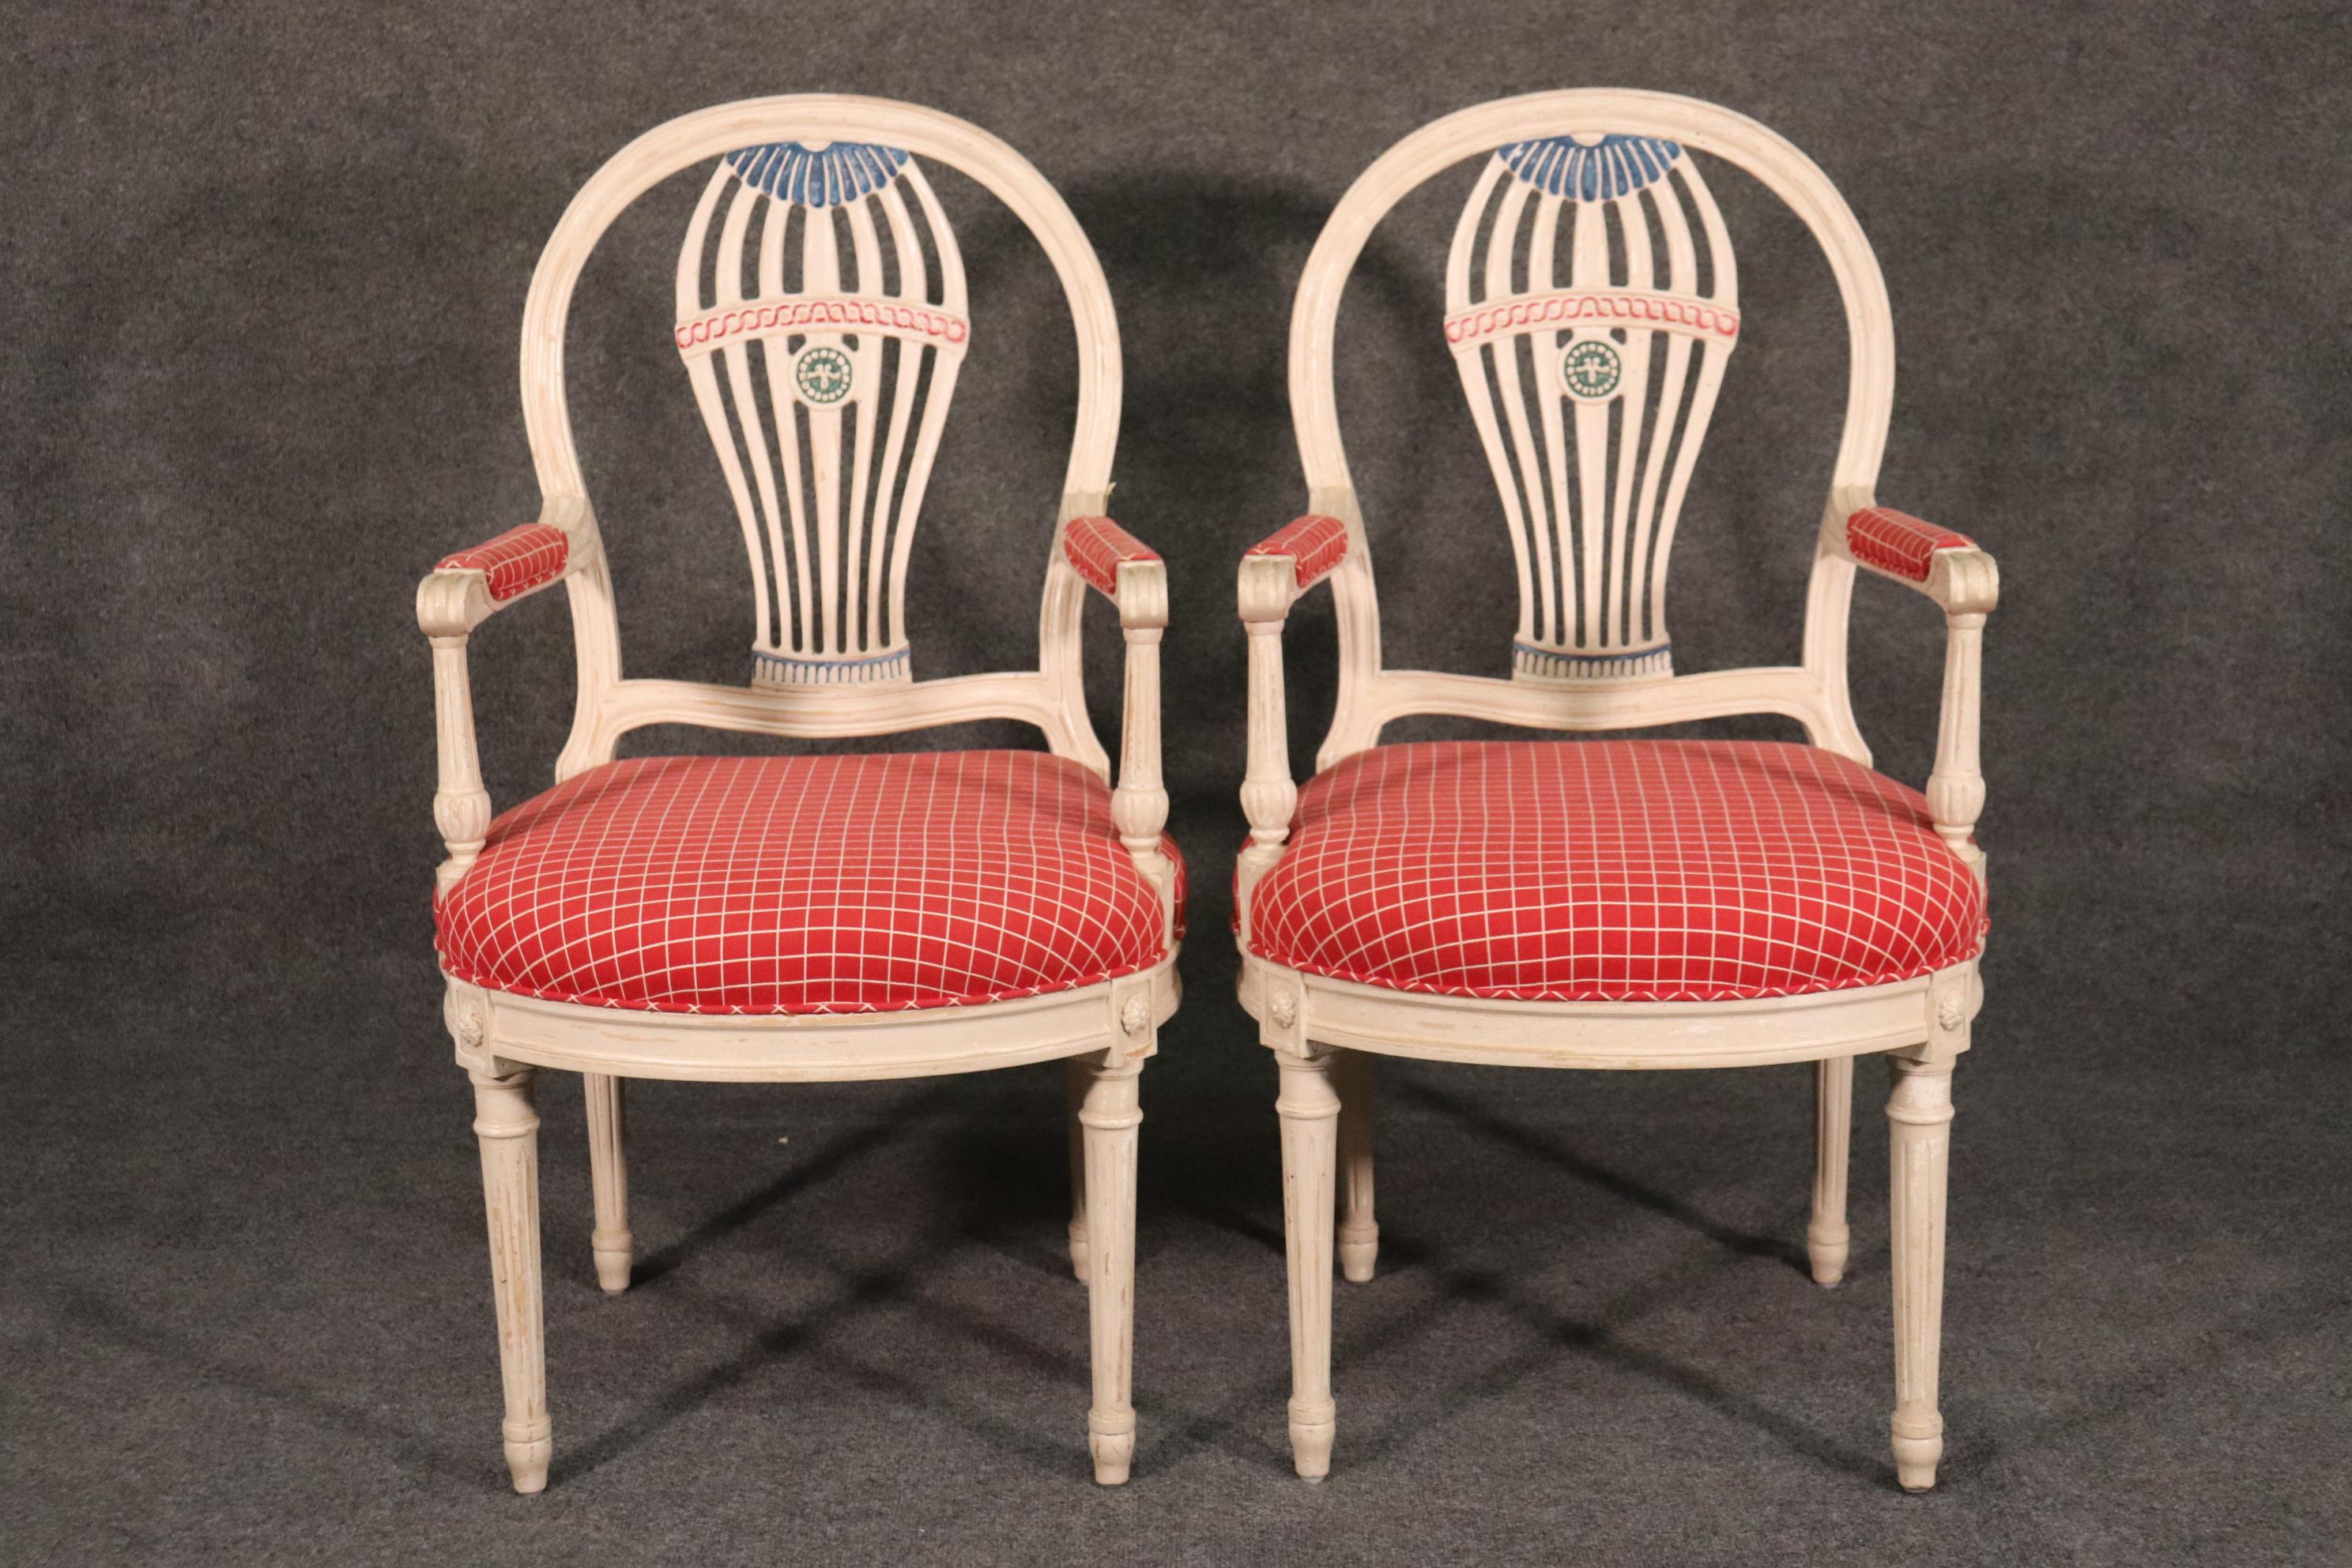 Beautifully hand-painted in Red, blue, white and green, these Maison Jansen chairs can be used at the head of a dining table as head chairs or as armchairs in any room setting. The chairs measure 39 tall x 21 wide x 24 deep and the seat height is 19